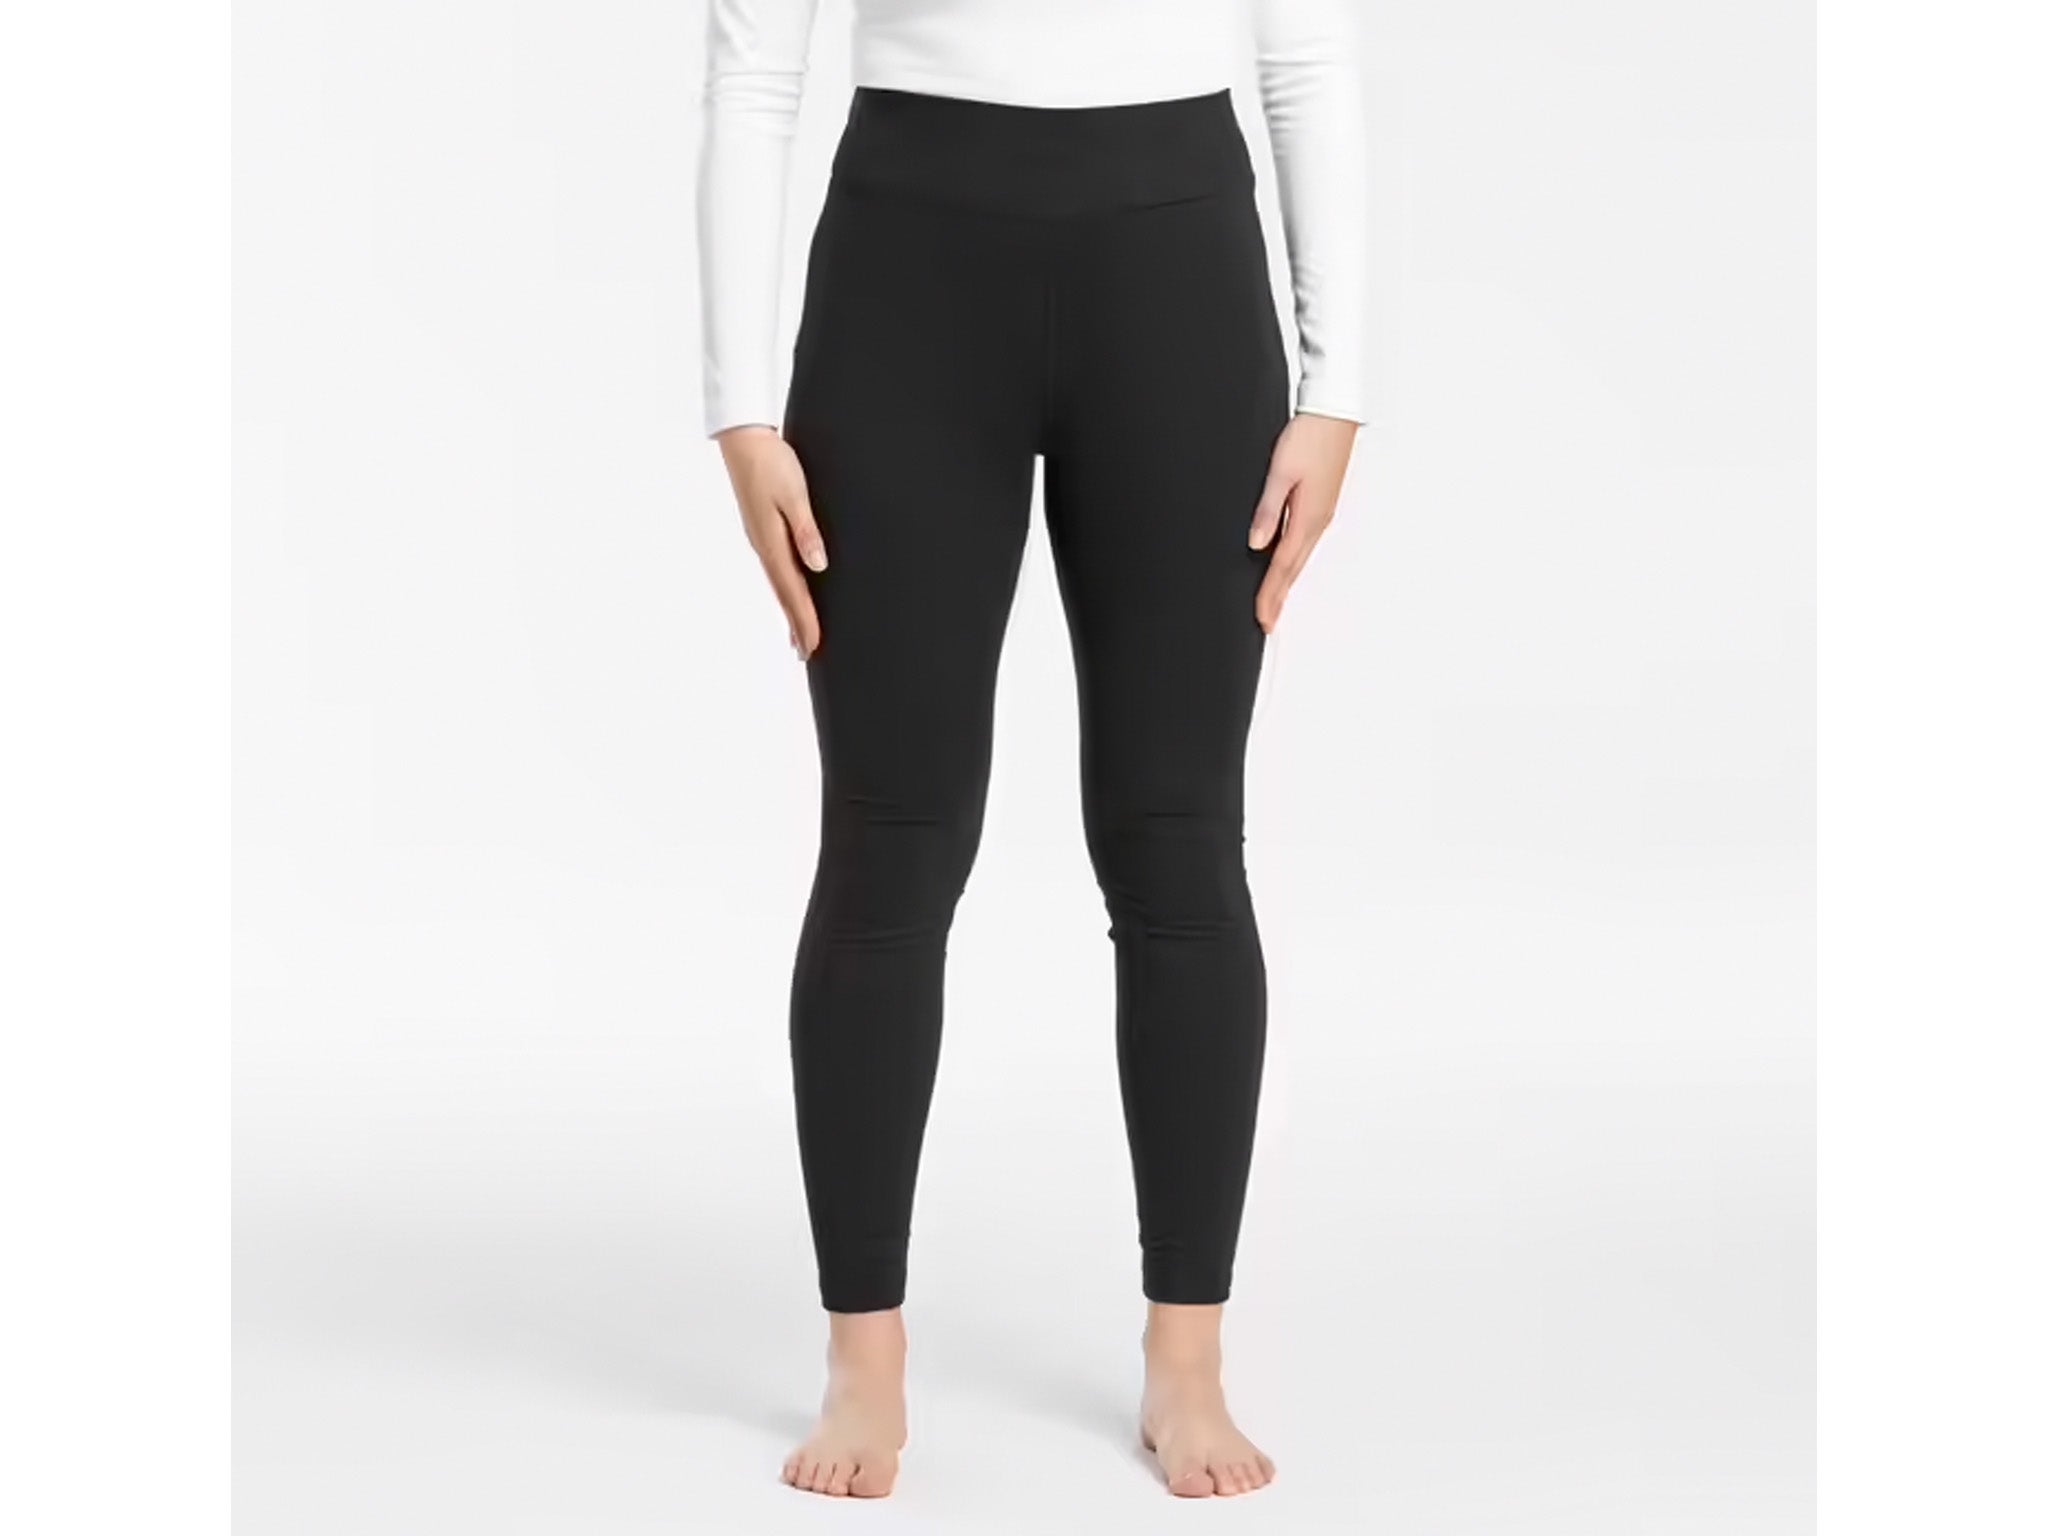 Thermal Underwear for Women (Thermal Long Johns) Sleeve Shirt & Pants Set,  Base Layer w/Leggings Bottoms Ski/Extreme Cold : Buy Online at Best Price